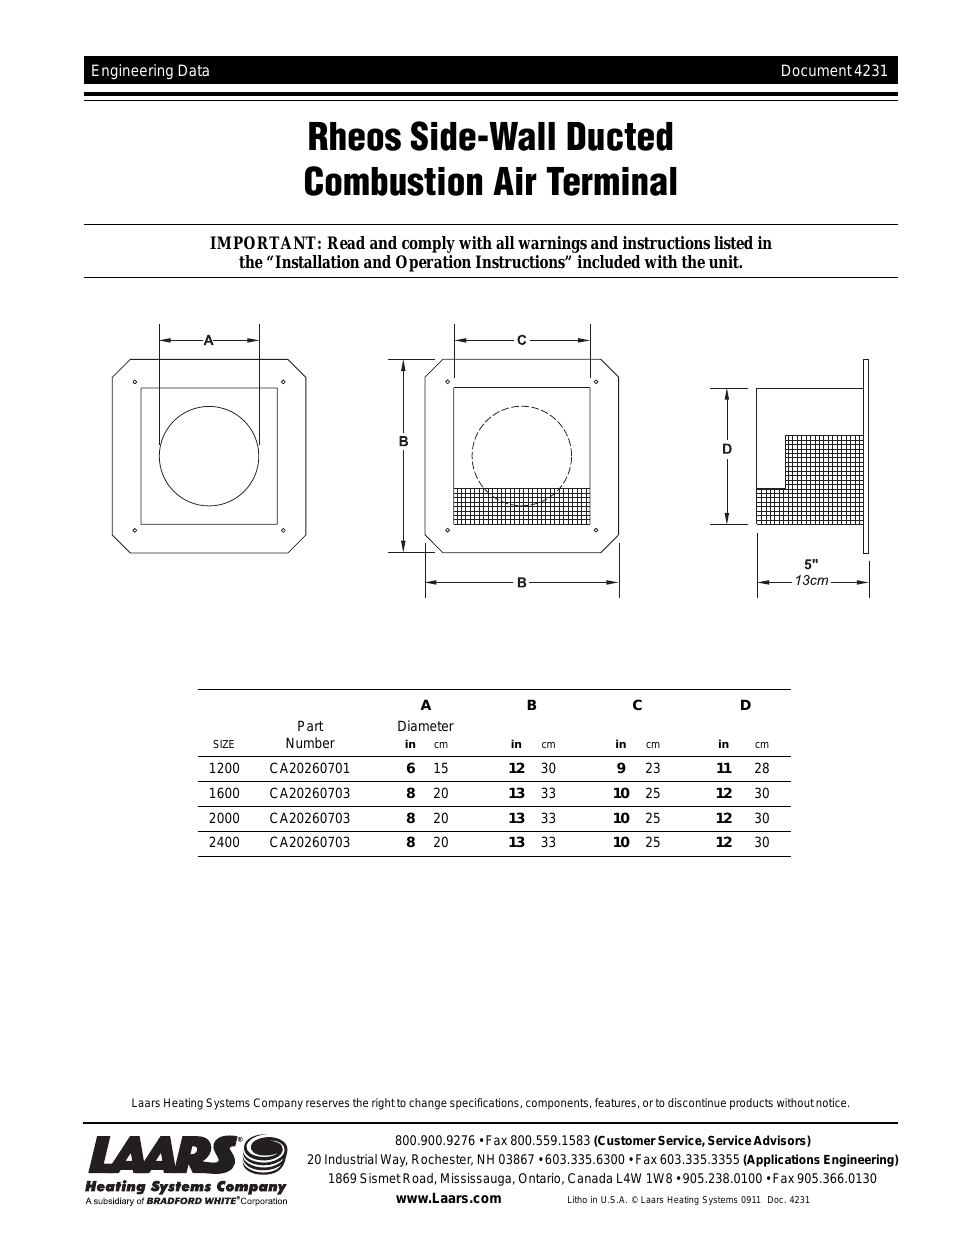 Rheos Side-Wall Ducted Combustion Air Terminal - Service Manual